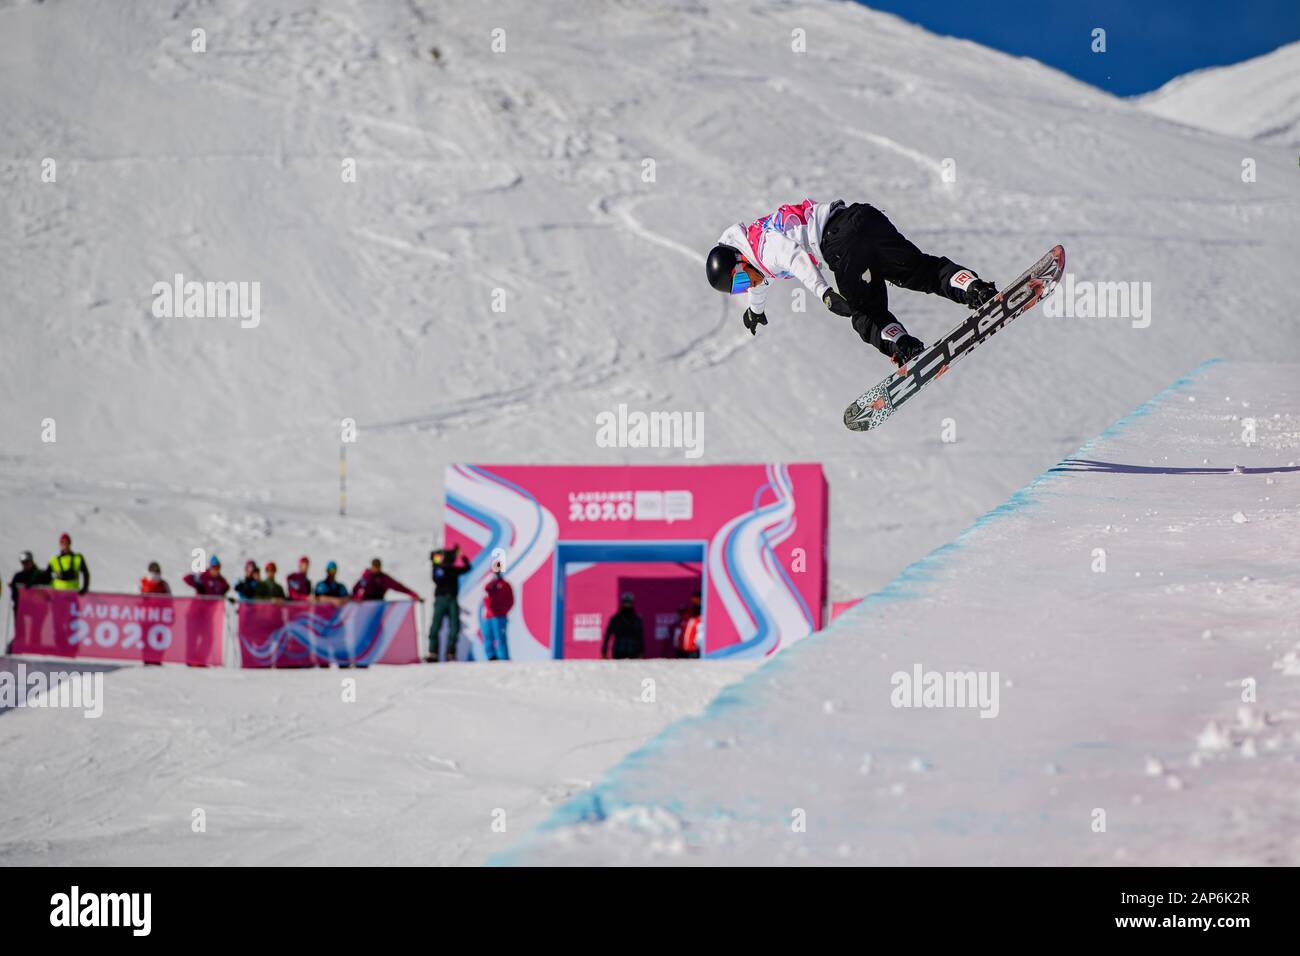 LAUSANNE, SWITZERLAND. 21th, Jan 2020. BIELE Gian Andrin (SUI) competes in the Men's Snowboard Halfpipe competitions during the Lausanne 2020 Youth Olympic Games at Leysin Park & Pipe on Tuesday, 21 January 2020. LAUSANNE, SWITZERLAND. Credit: Taka G Wu/Alamy Live News Stock Photo